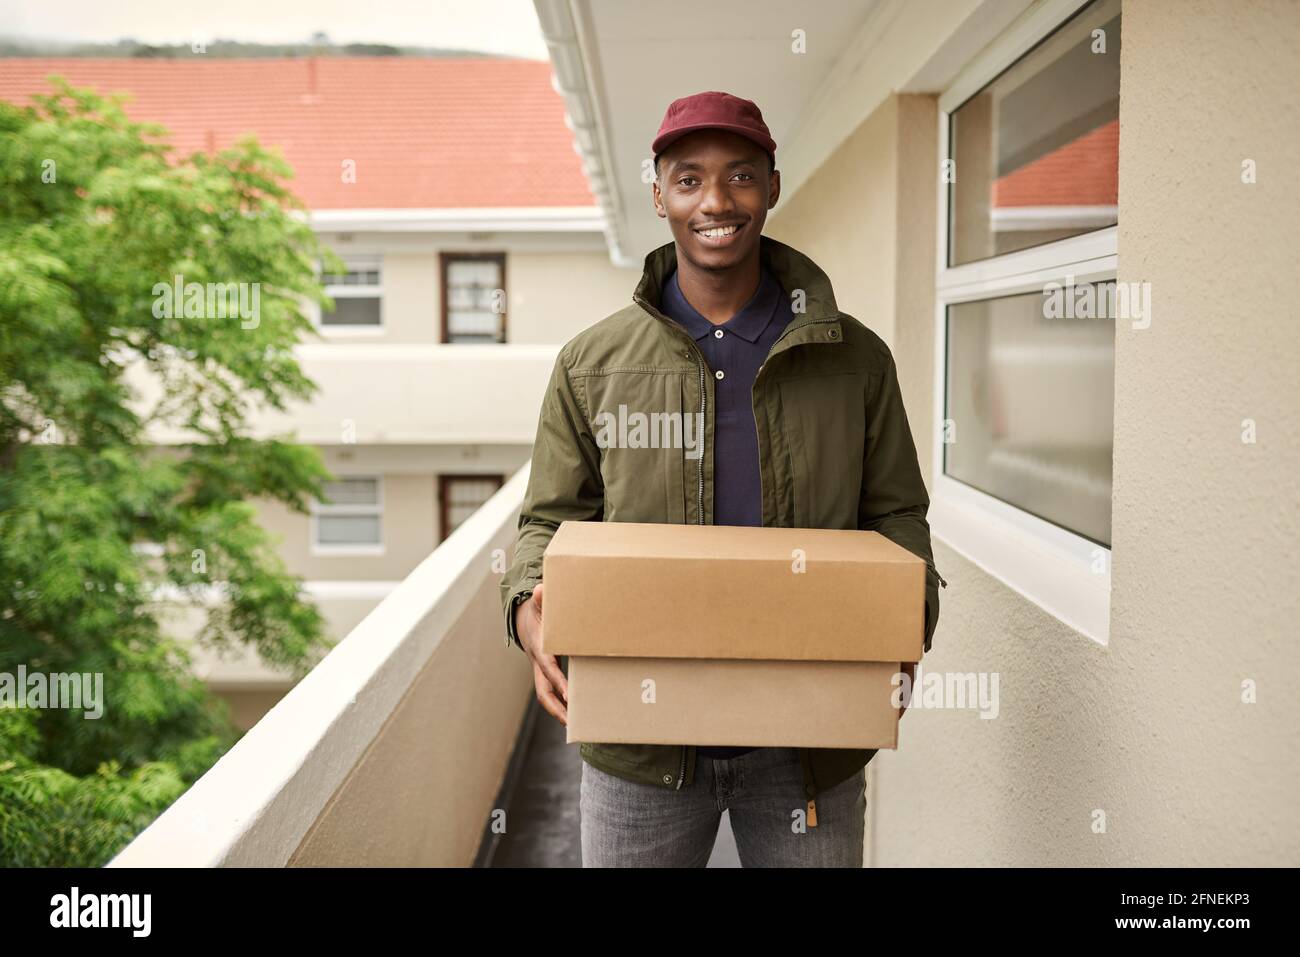 Smiling African delivery man standing outside carrying packages Stock Photo